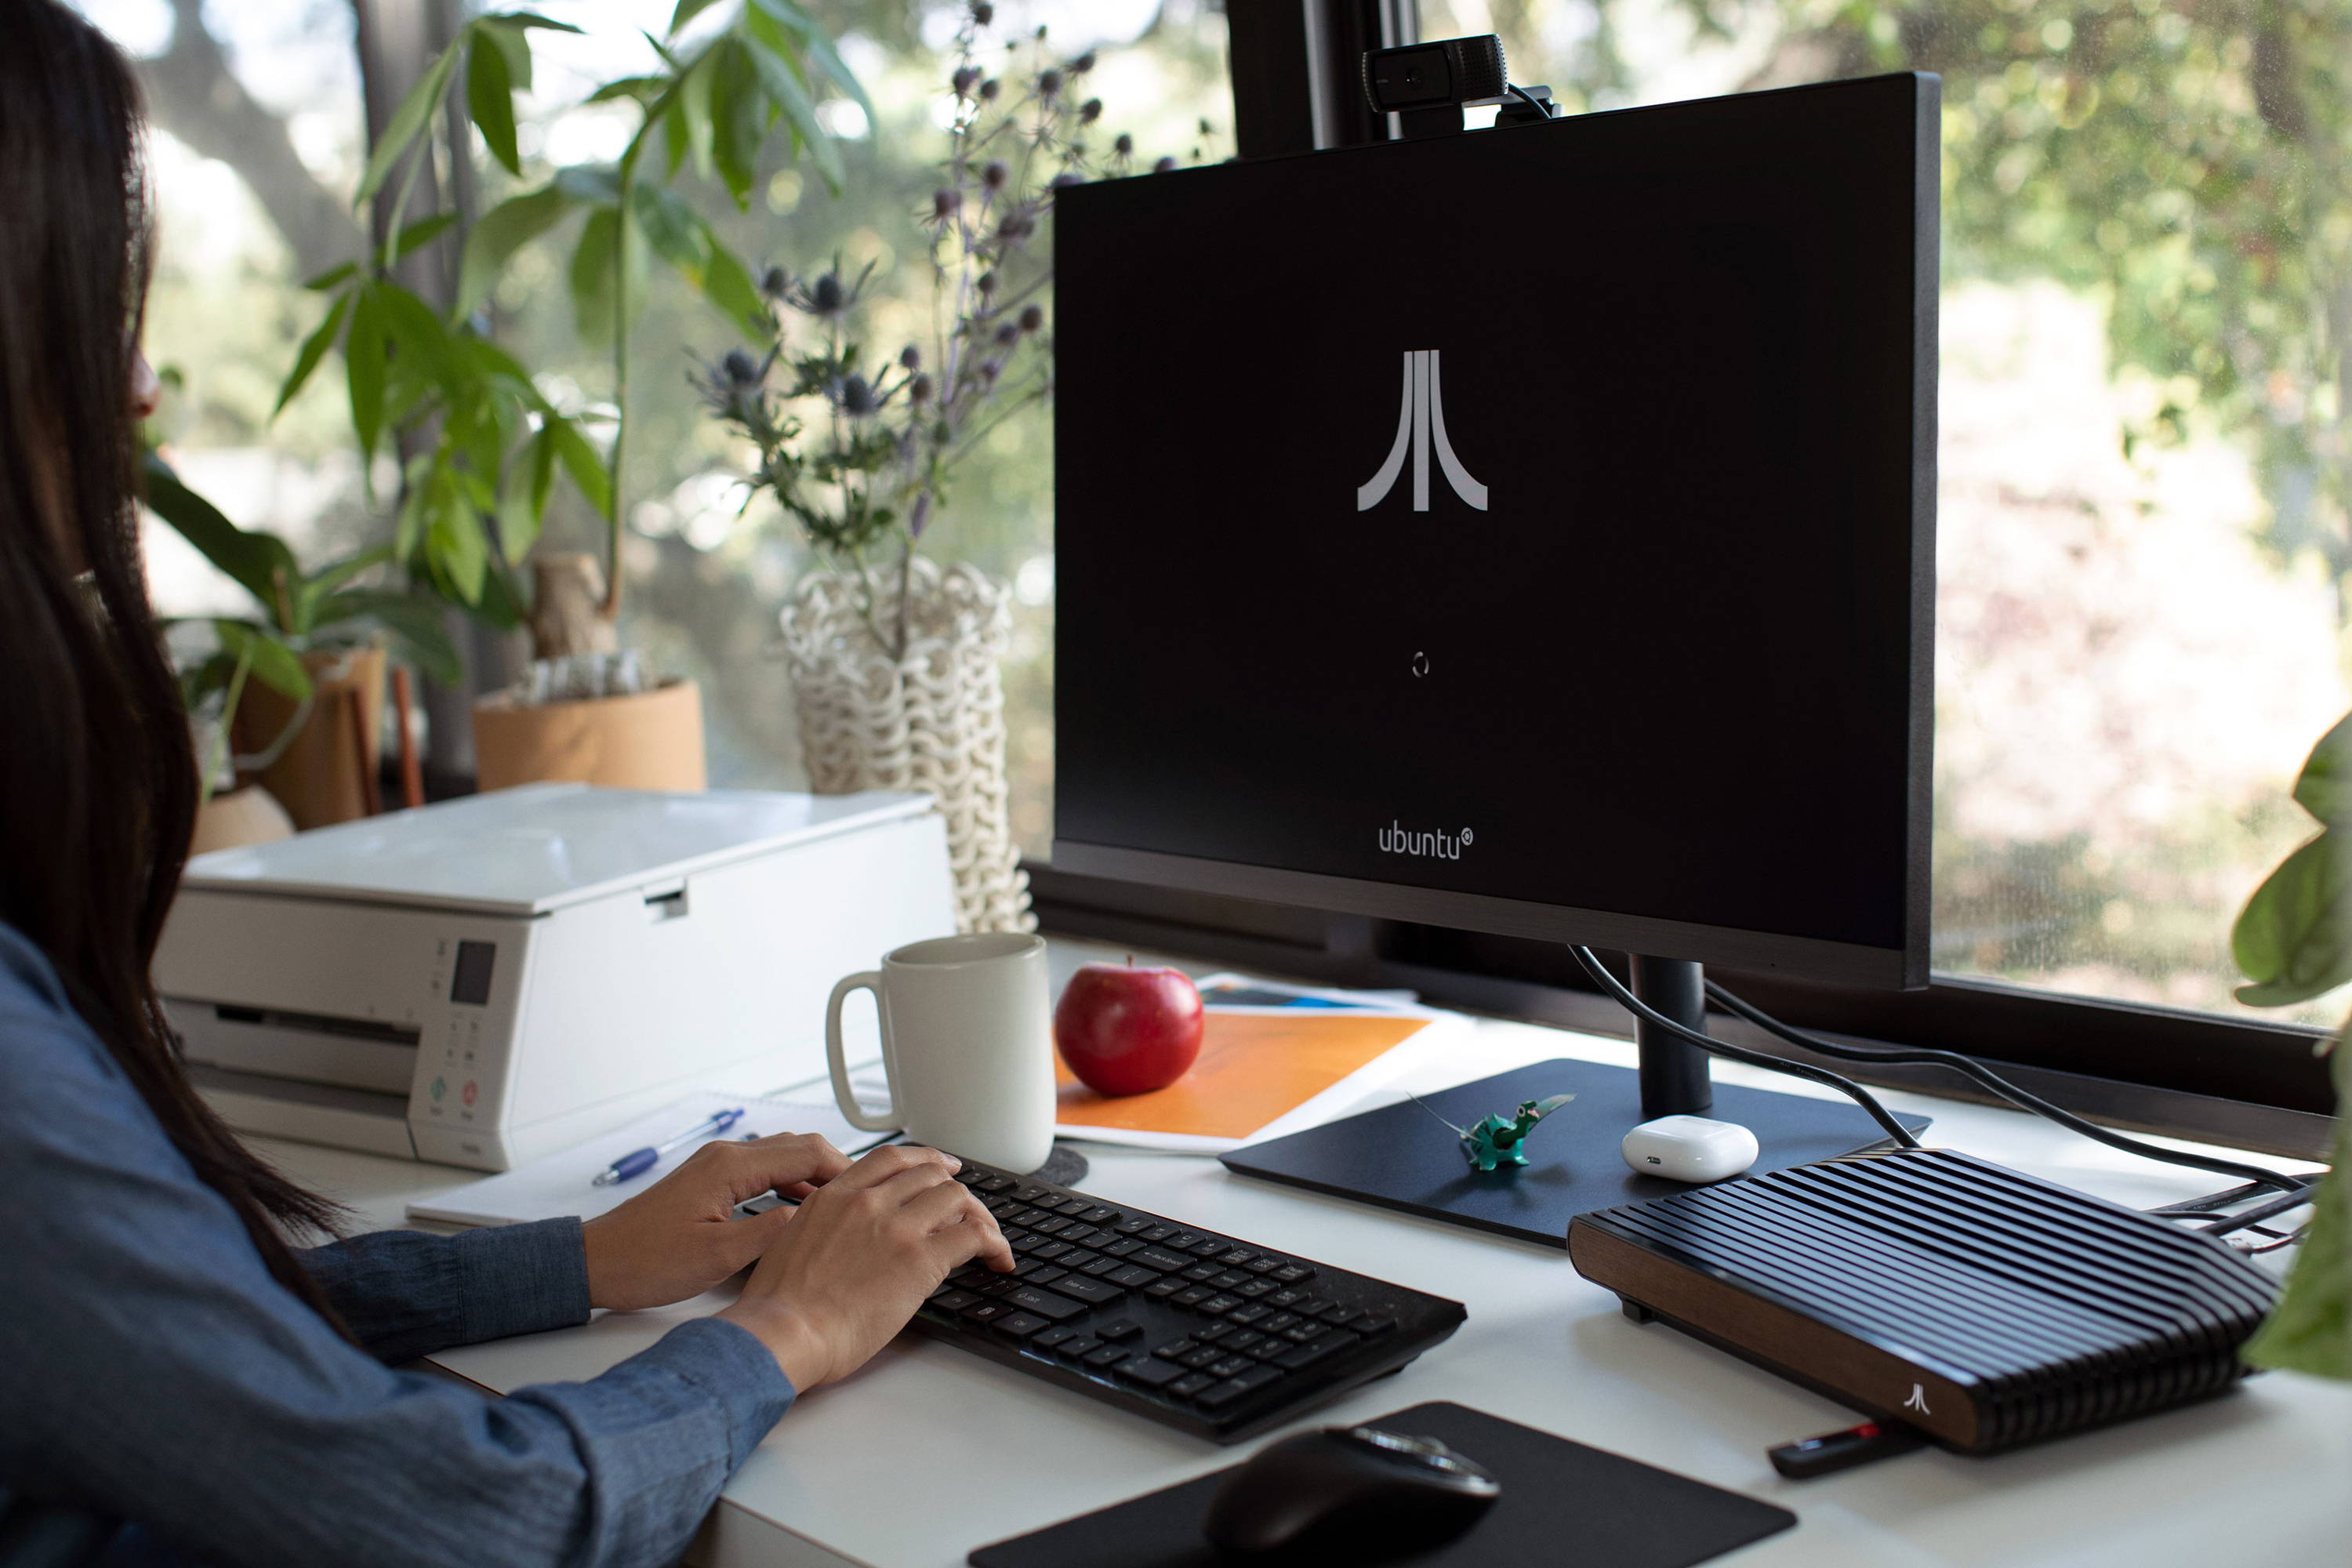  You can buy an official Atari console again, if you've lost all self-respect 